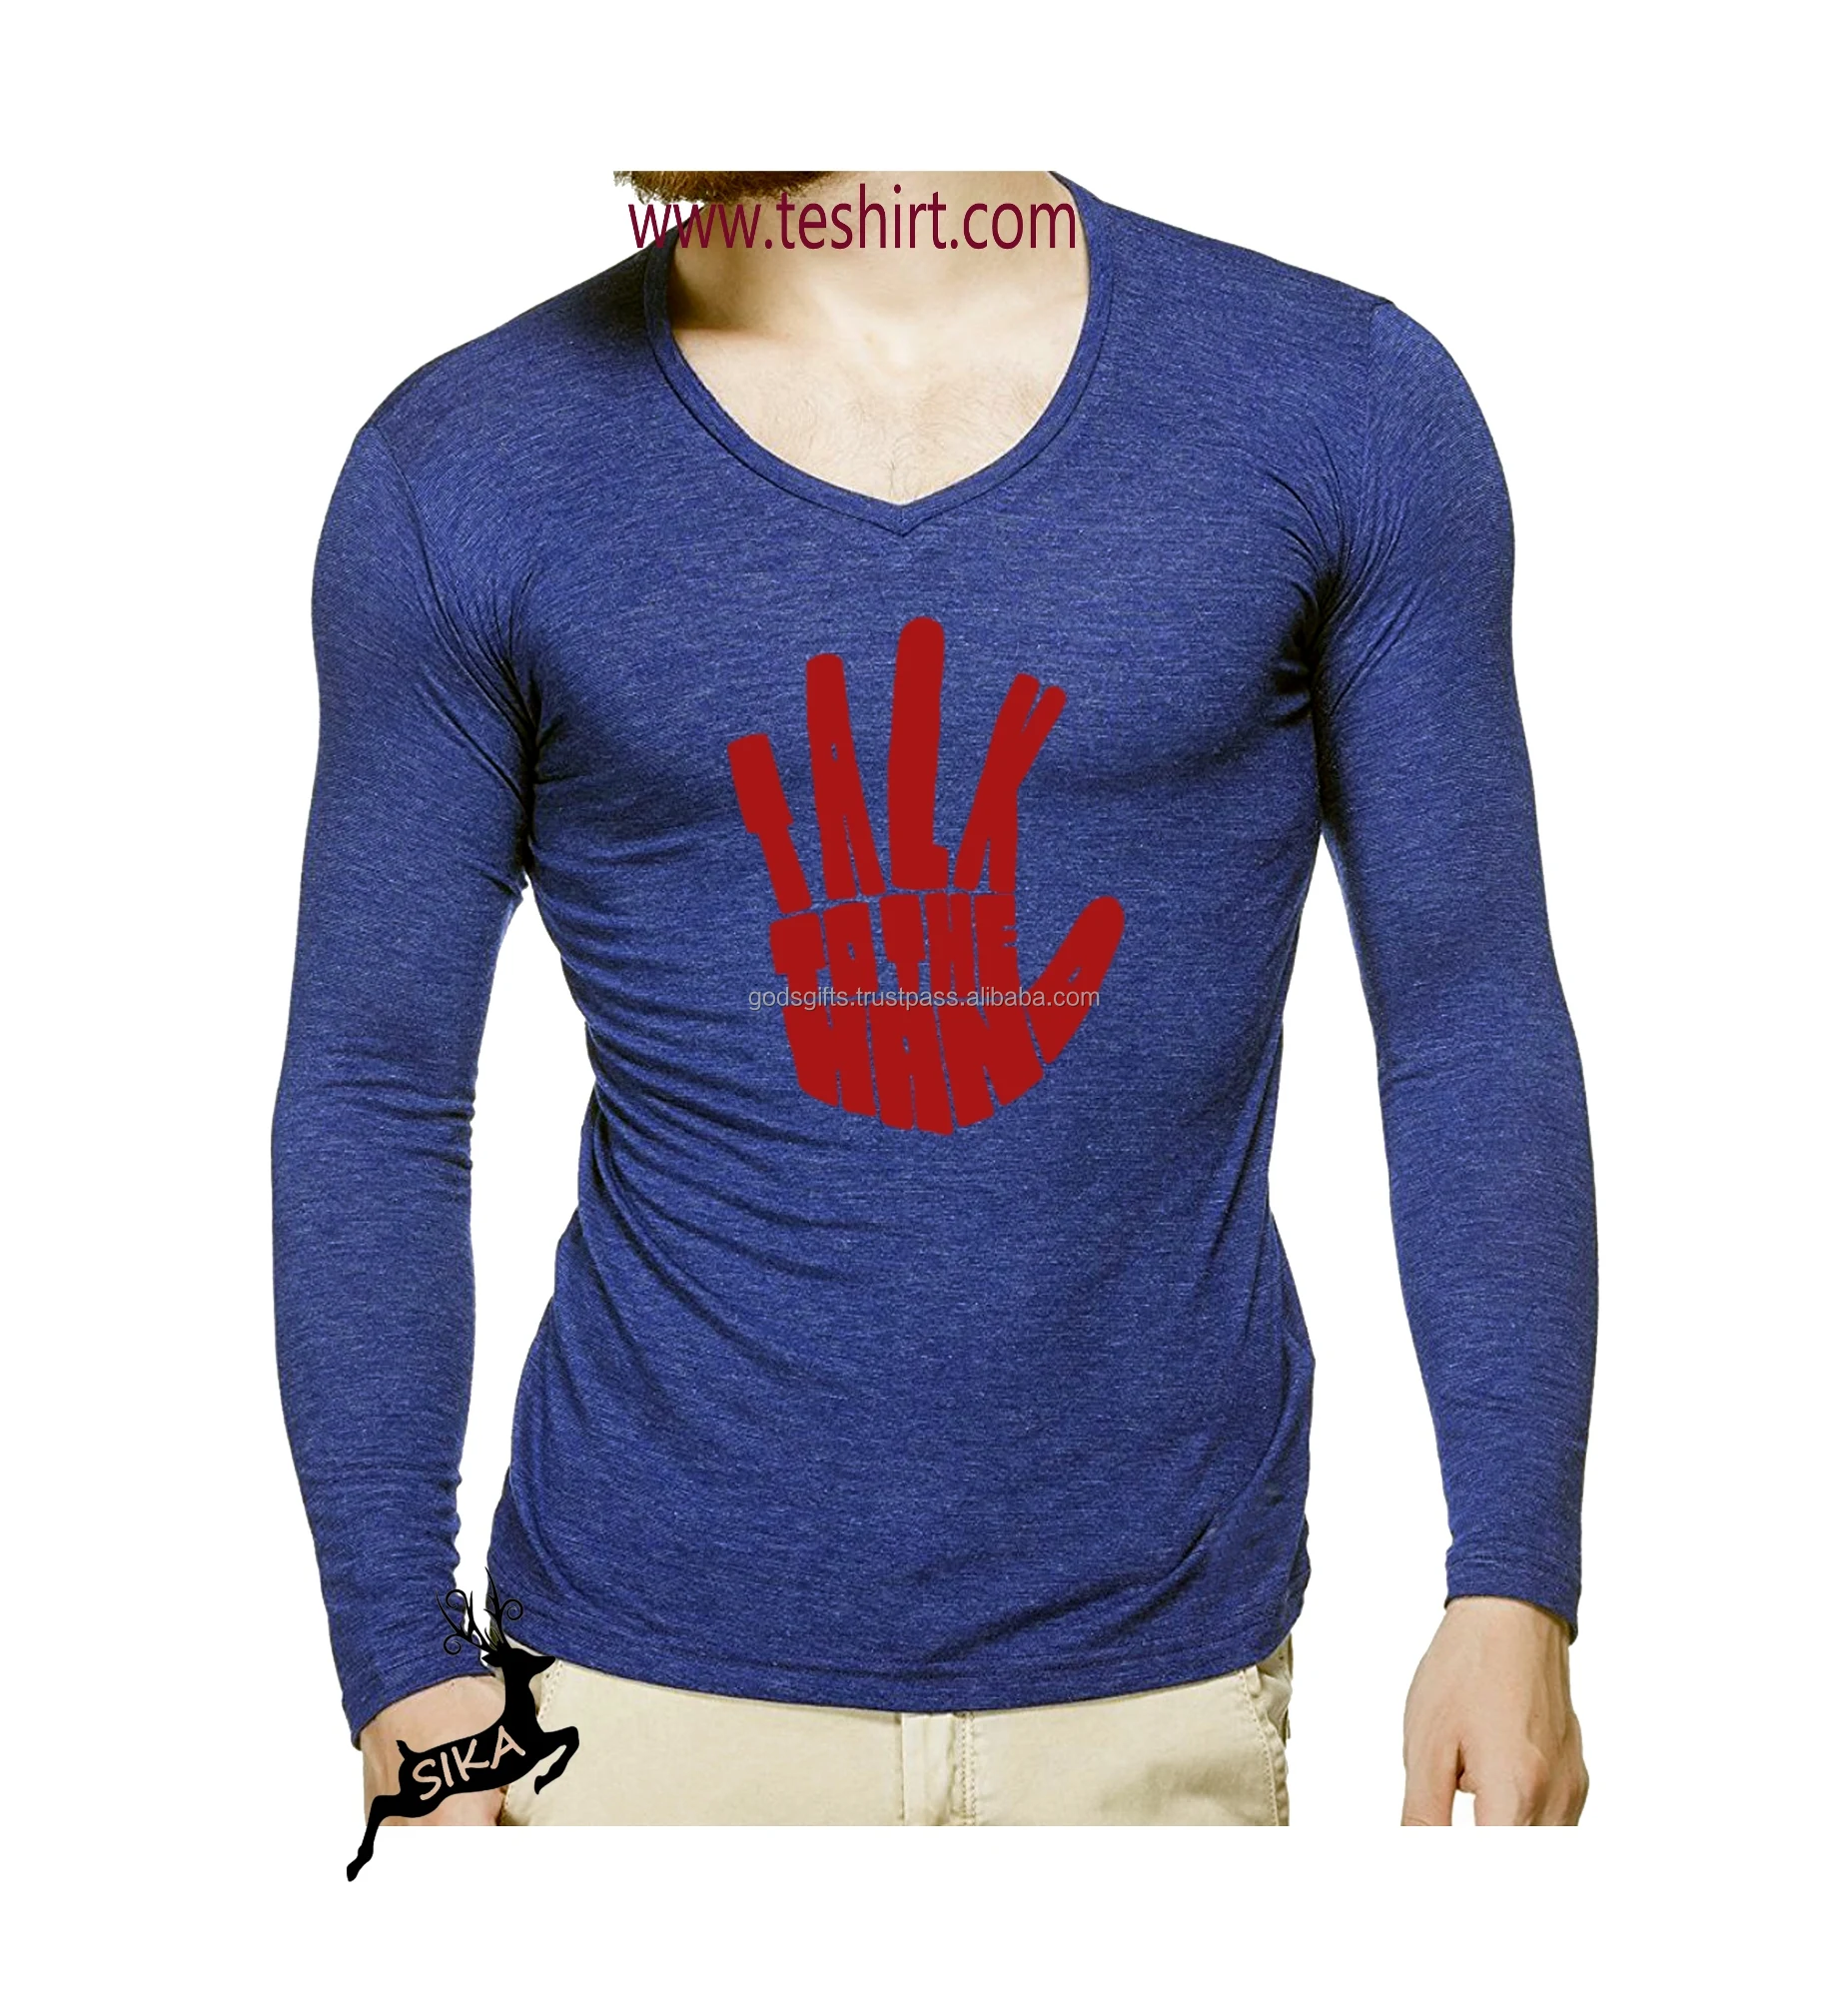 cheap sports t shirts online india